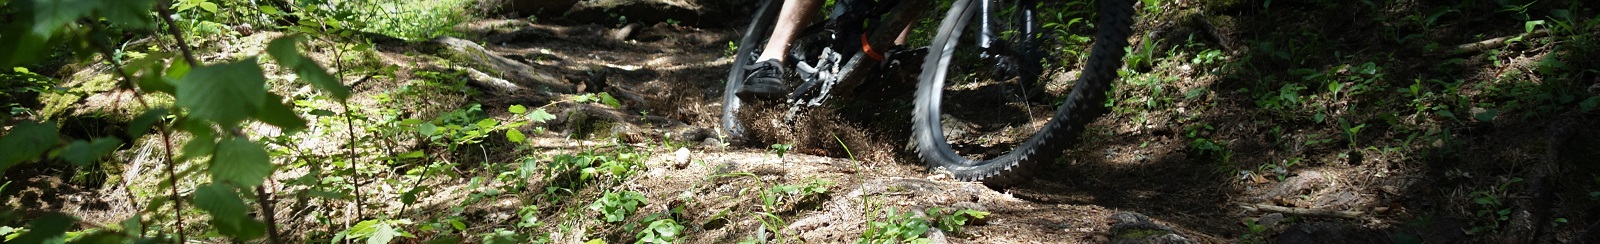 Riding mountain bikes in Chamonix. There's loam in amongst the rocks, roots steep and gnar.